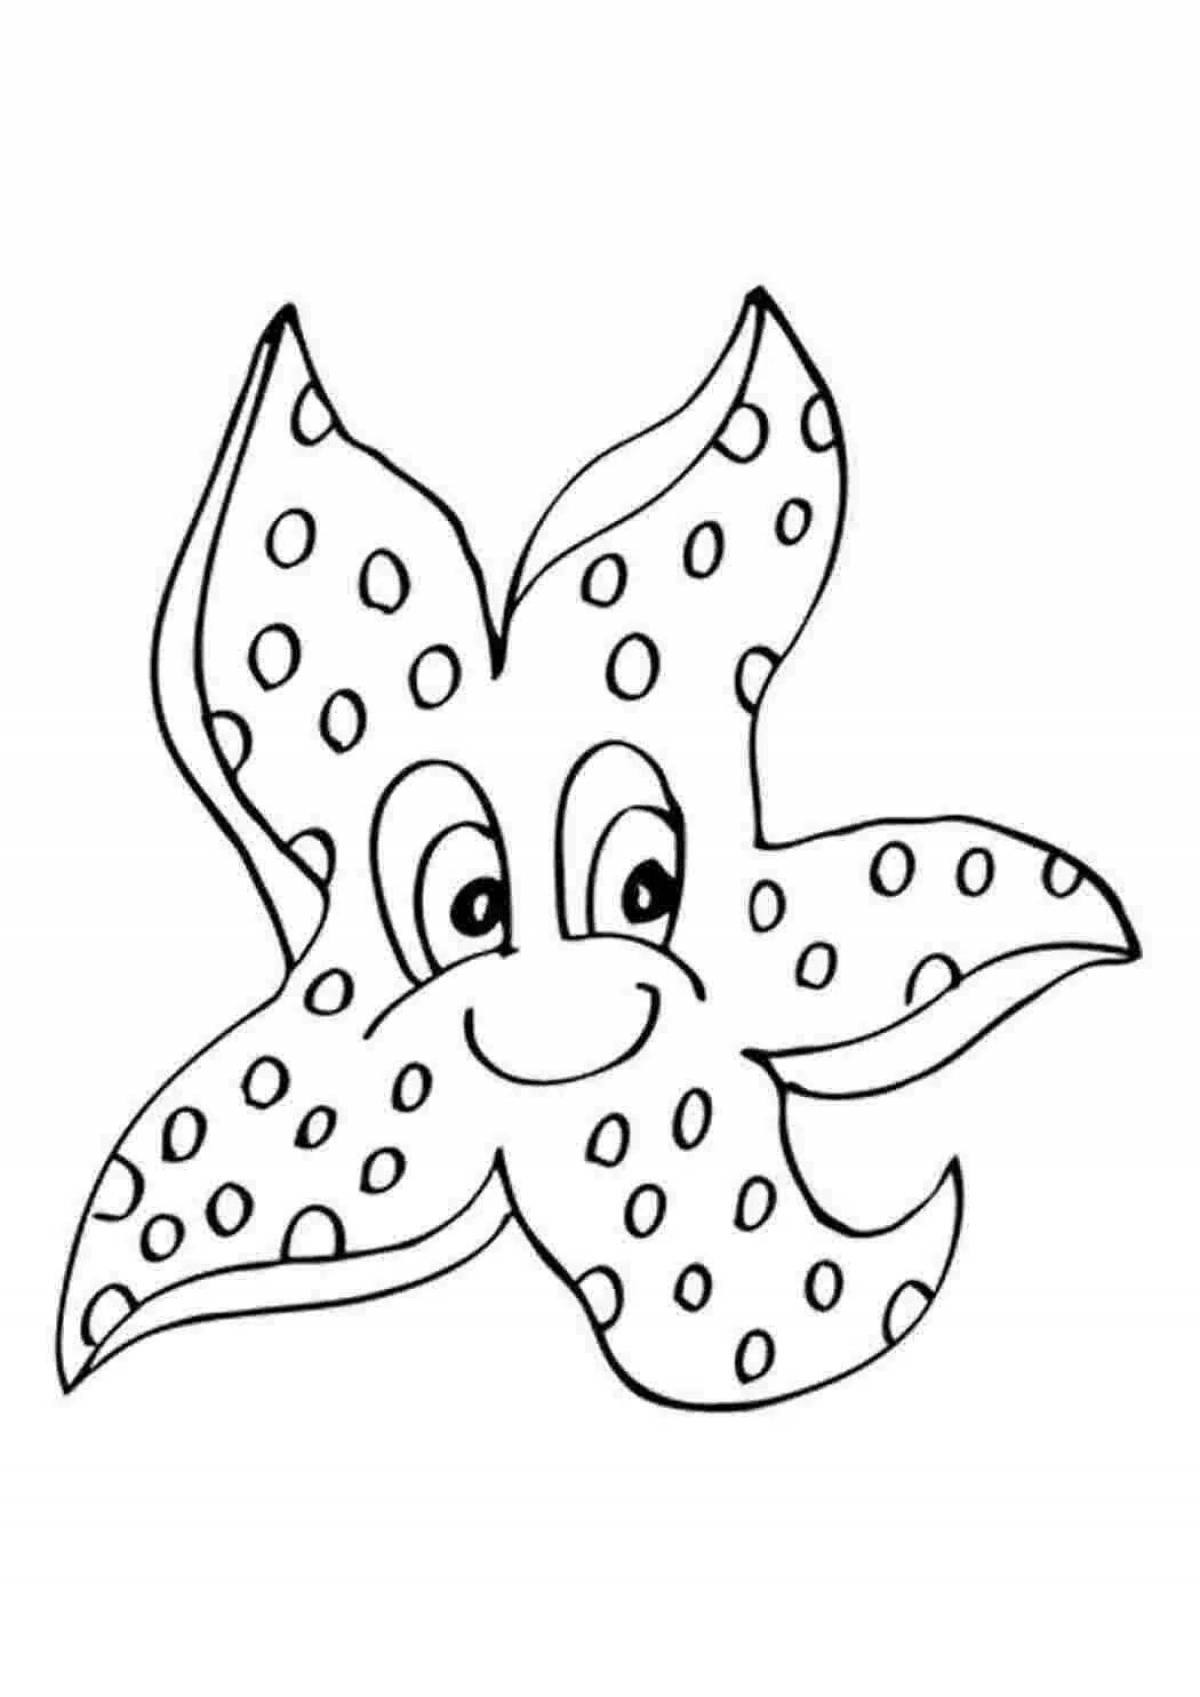 Exciting starfish coloring book for kids